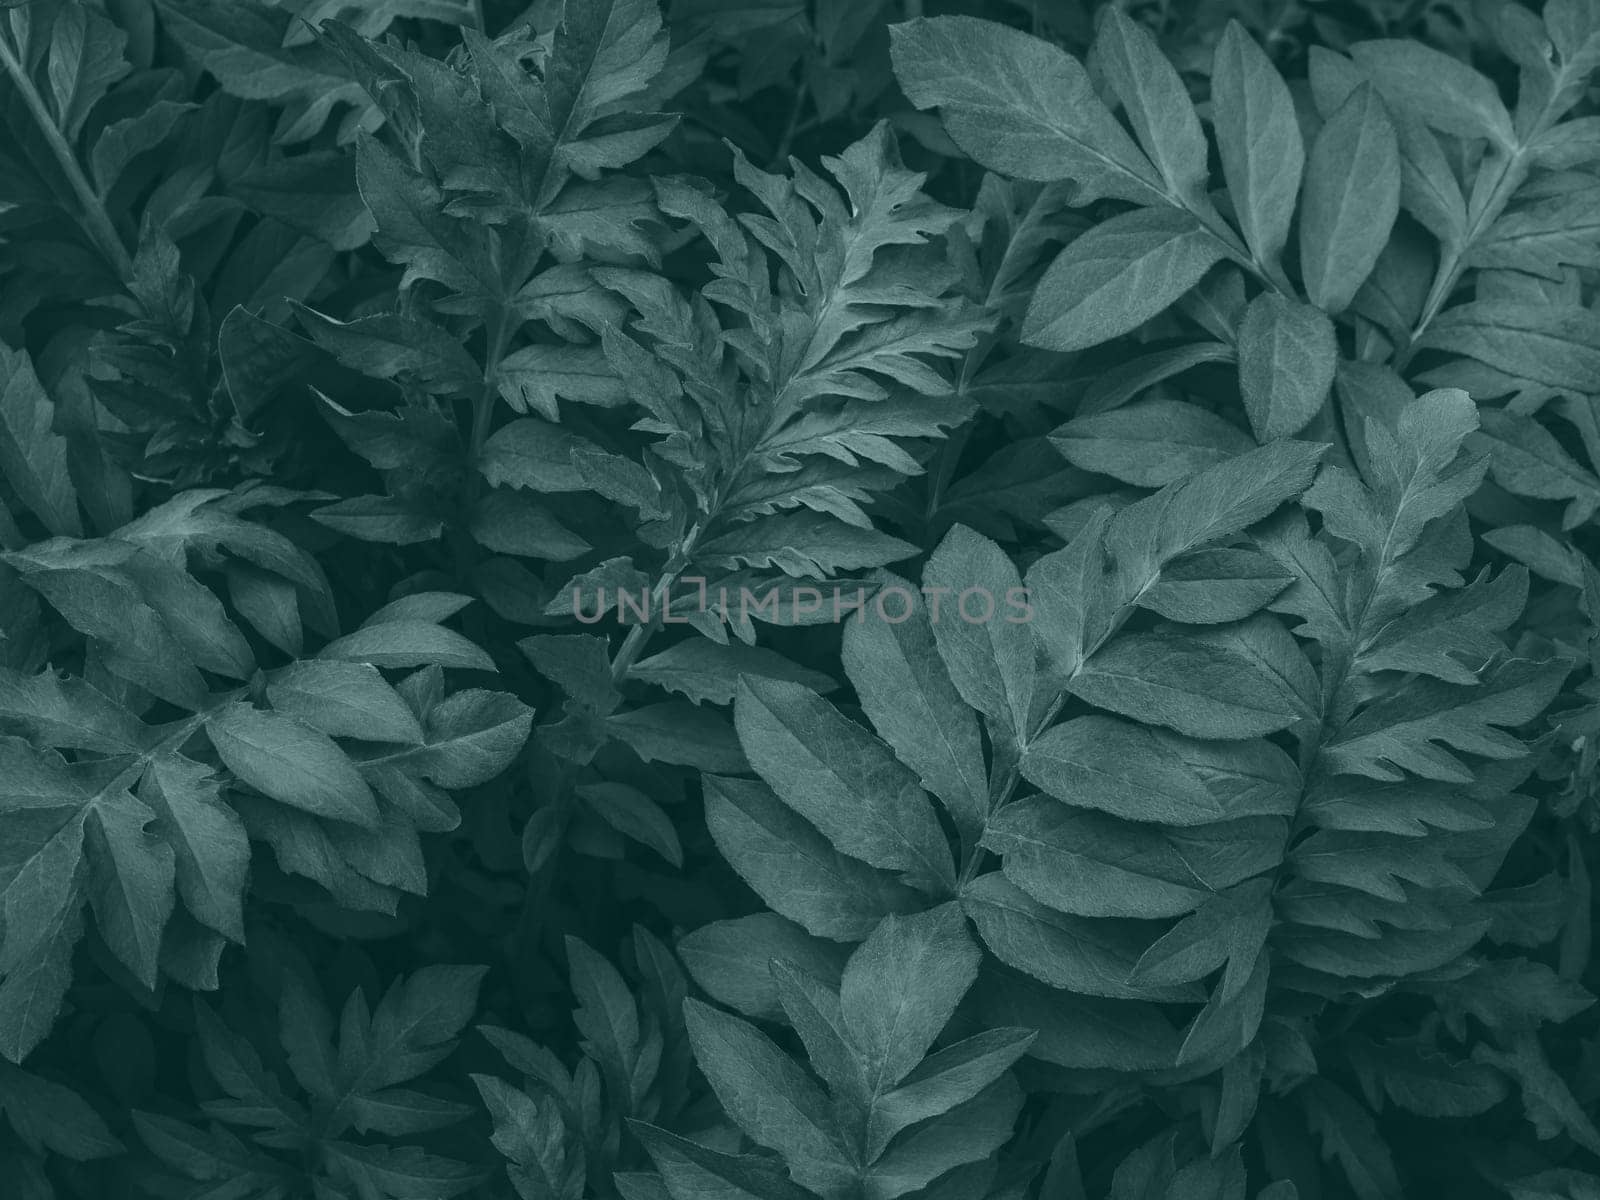 Abstract leaf texture background in trendy color of 2021. Leaves of colour tidewater green. Dark art moody floral. Nature decor for presentation or wallpaper desktop. Creative layout for your products by Halina